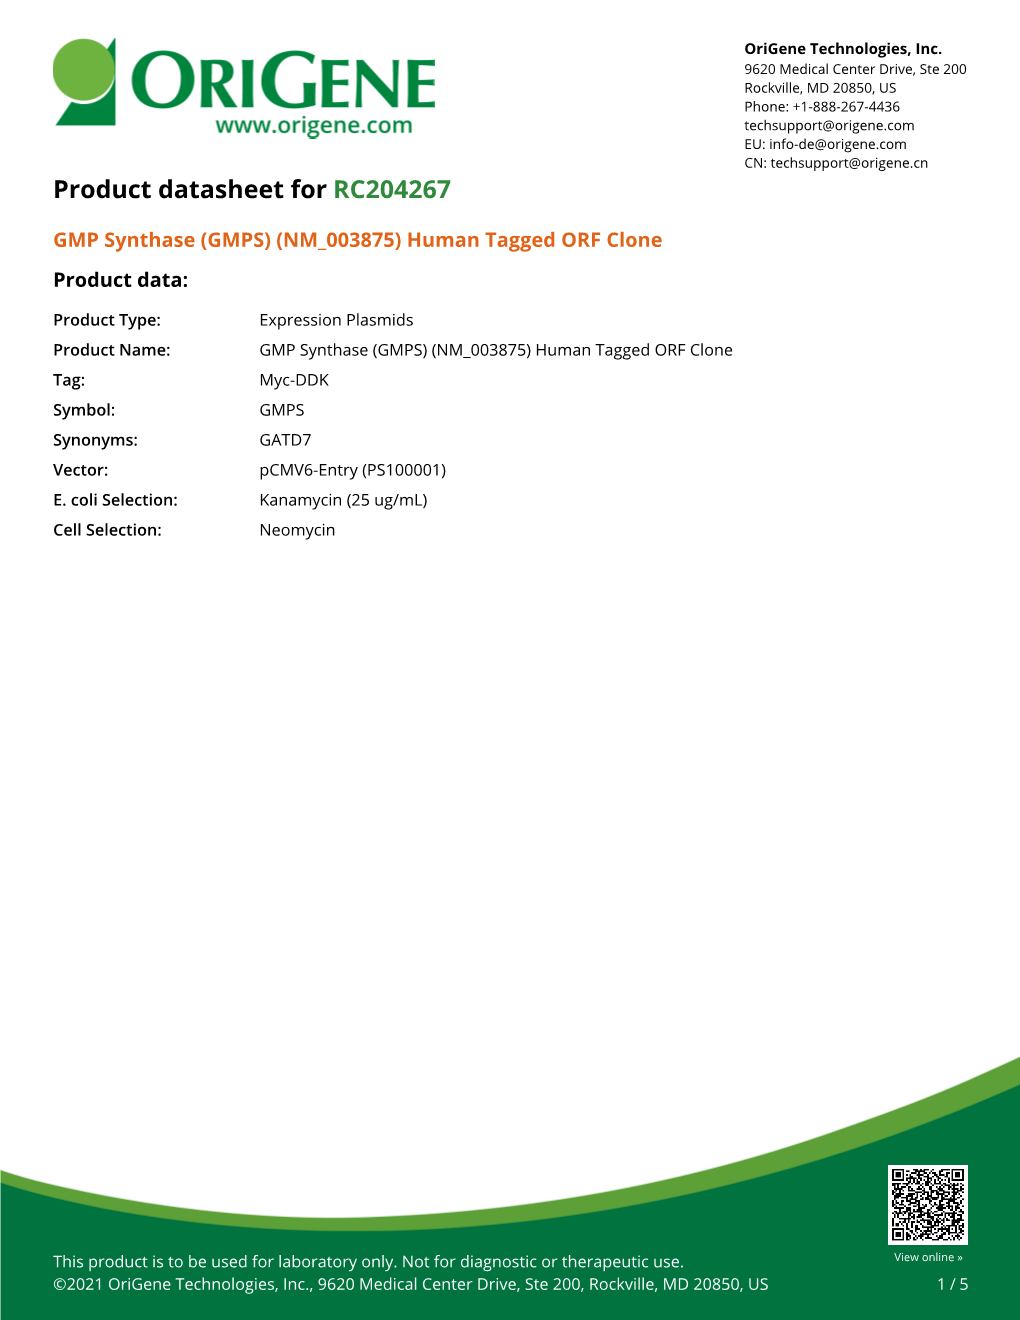 GMP Synthase (GMPS) (NM 003875) Human Tagged ORF Clone Product Data